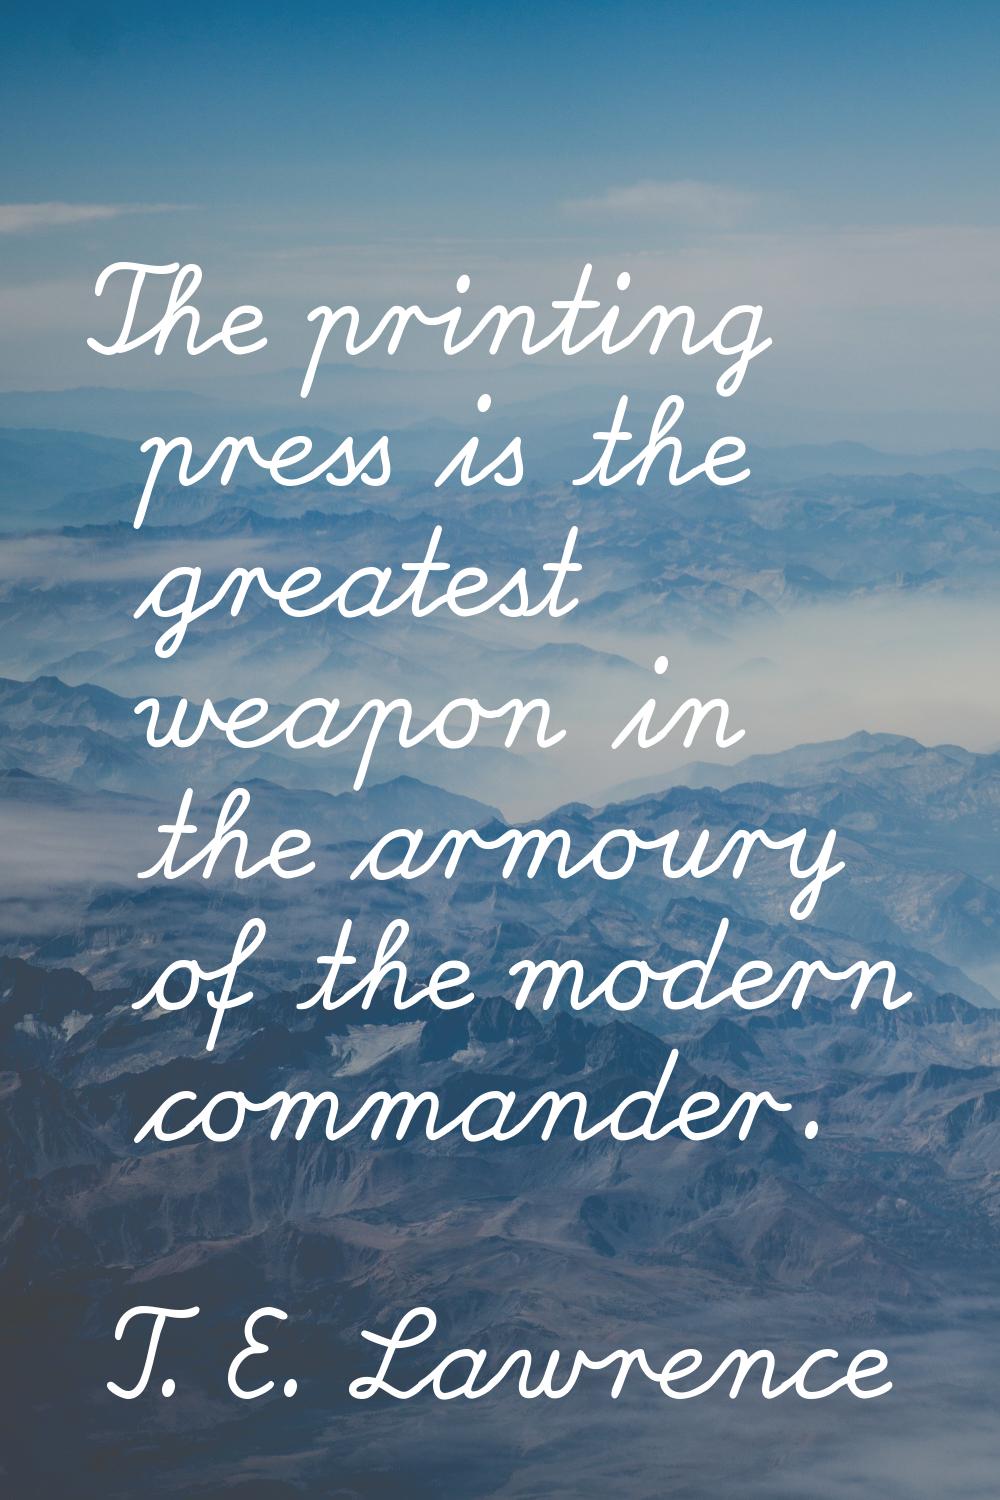 The printing press is the greatest weapon in the armoury of the modern commander.